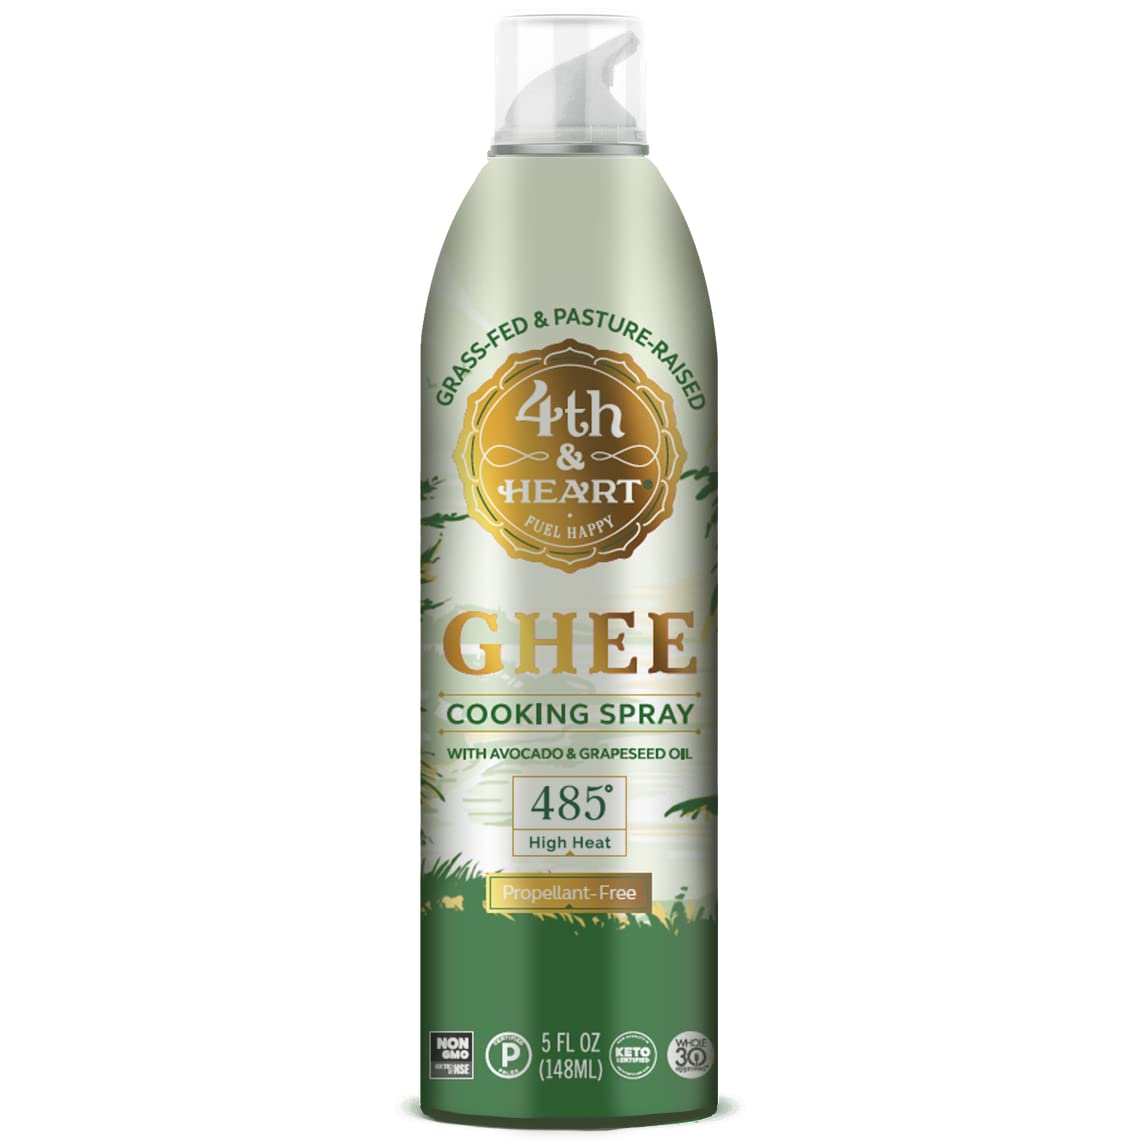 4th & Heart Original Ghee Oil Cooking Spray, 5 Ounce, Non-Stick High Heat Blend of Grass-fed Ghee, Avocado, and Grapeseed Oils, Keto, Pasture Raised, Lactose Free, Certified Paleo